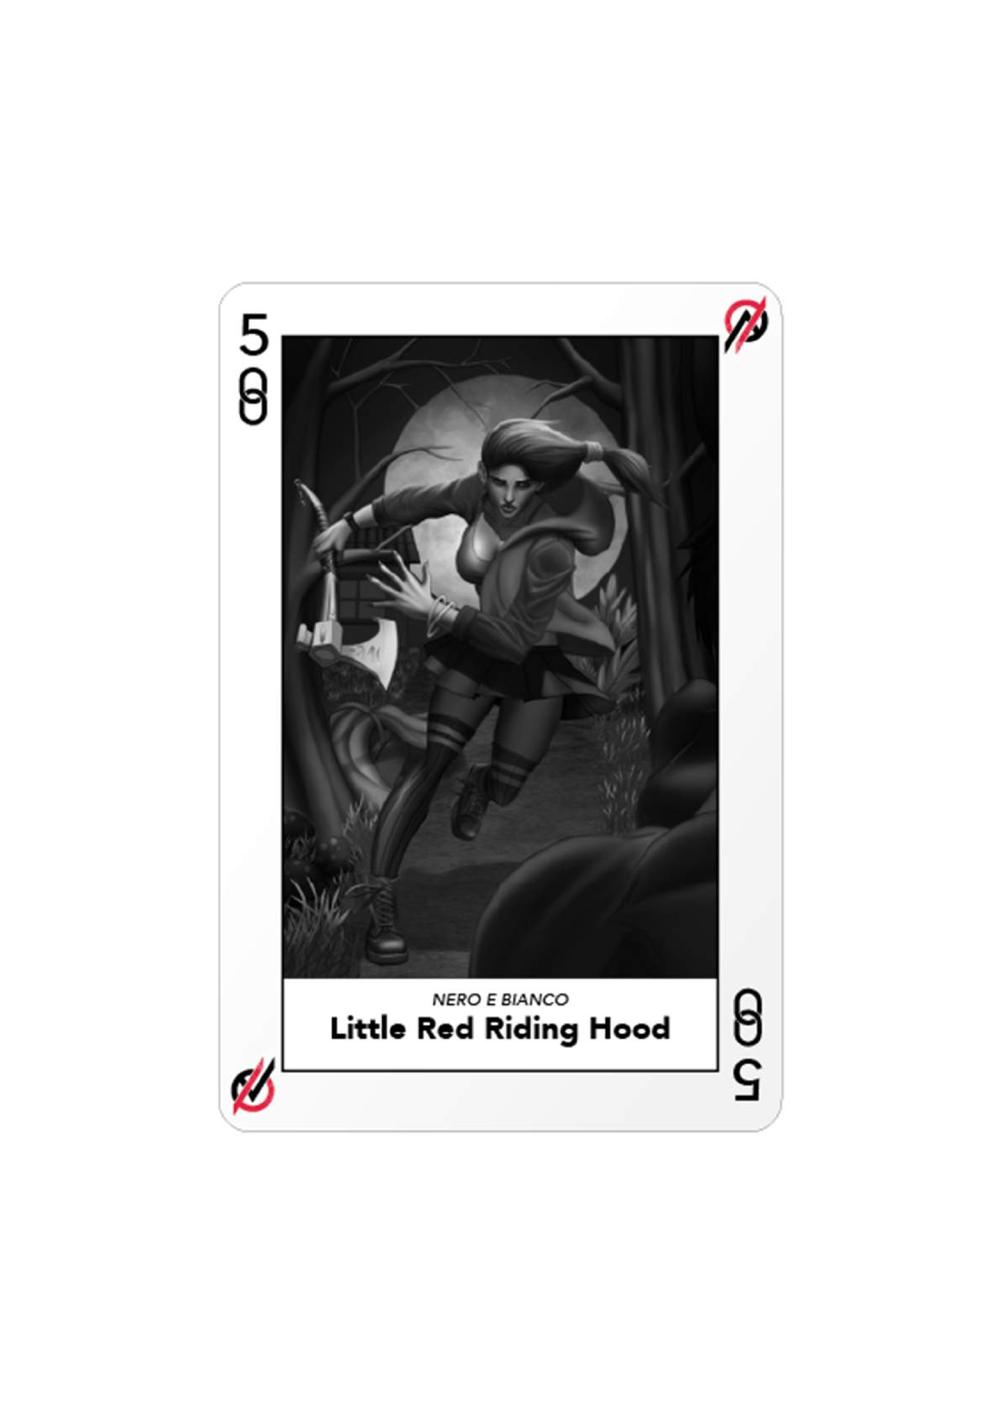 Certificate of Authenticity and Consignment - Little Red Riding Hood